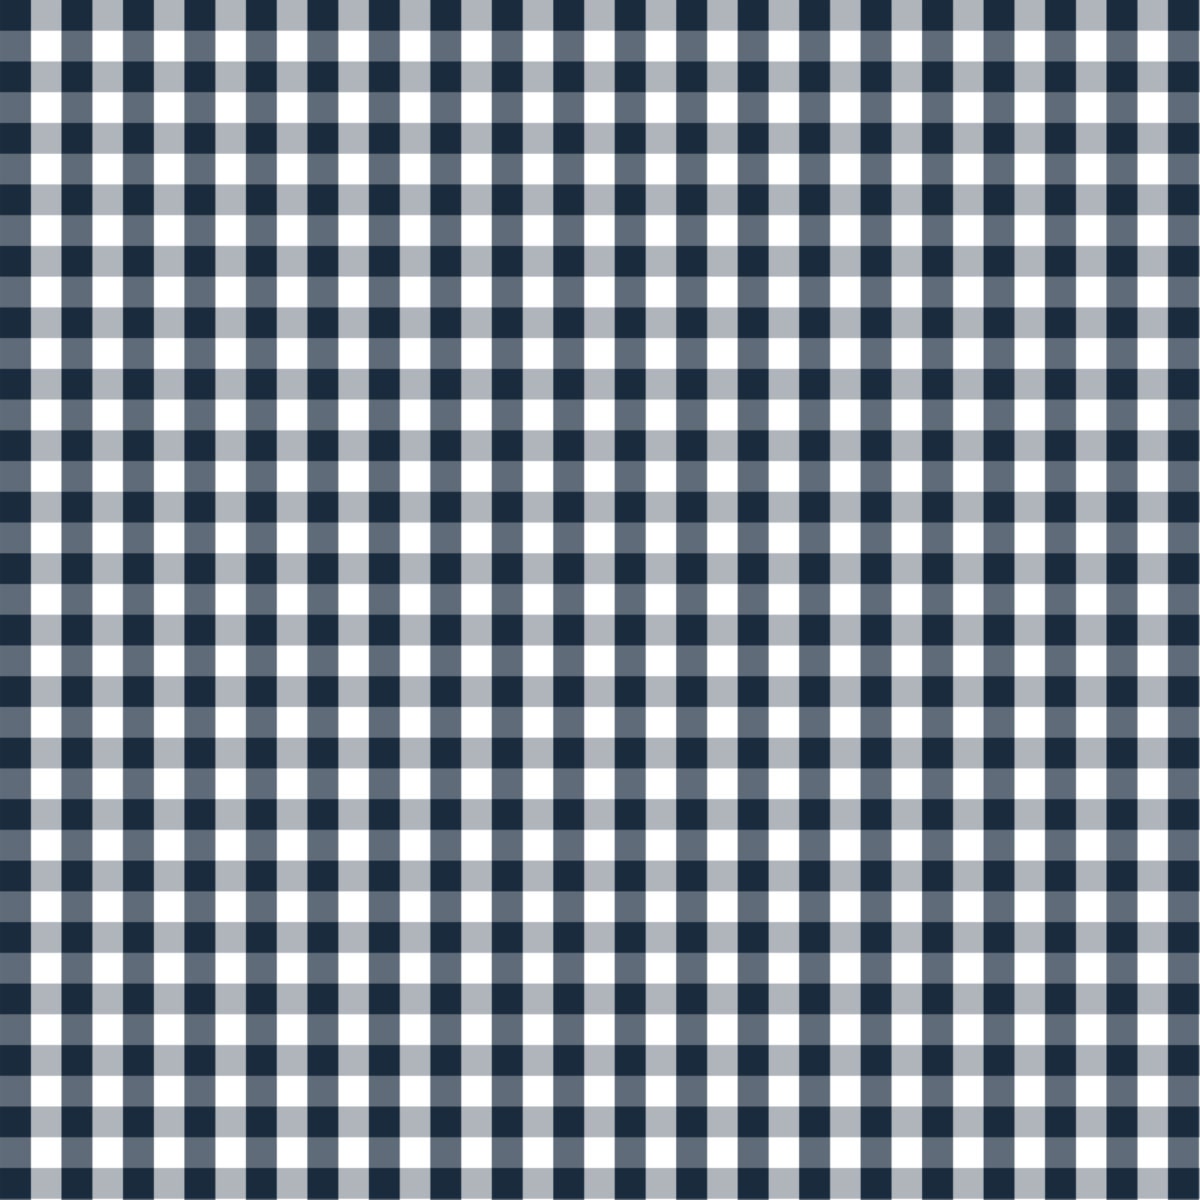 Gingham and Dots and Stitch VI, Surface